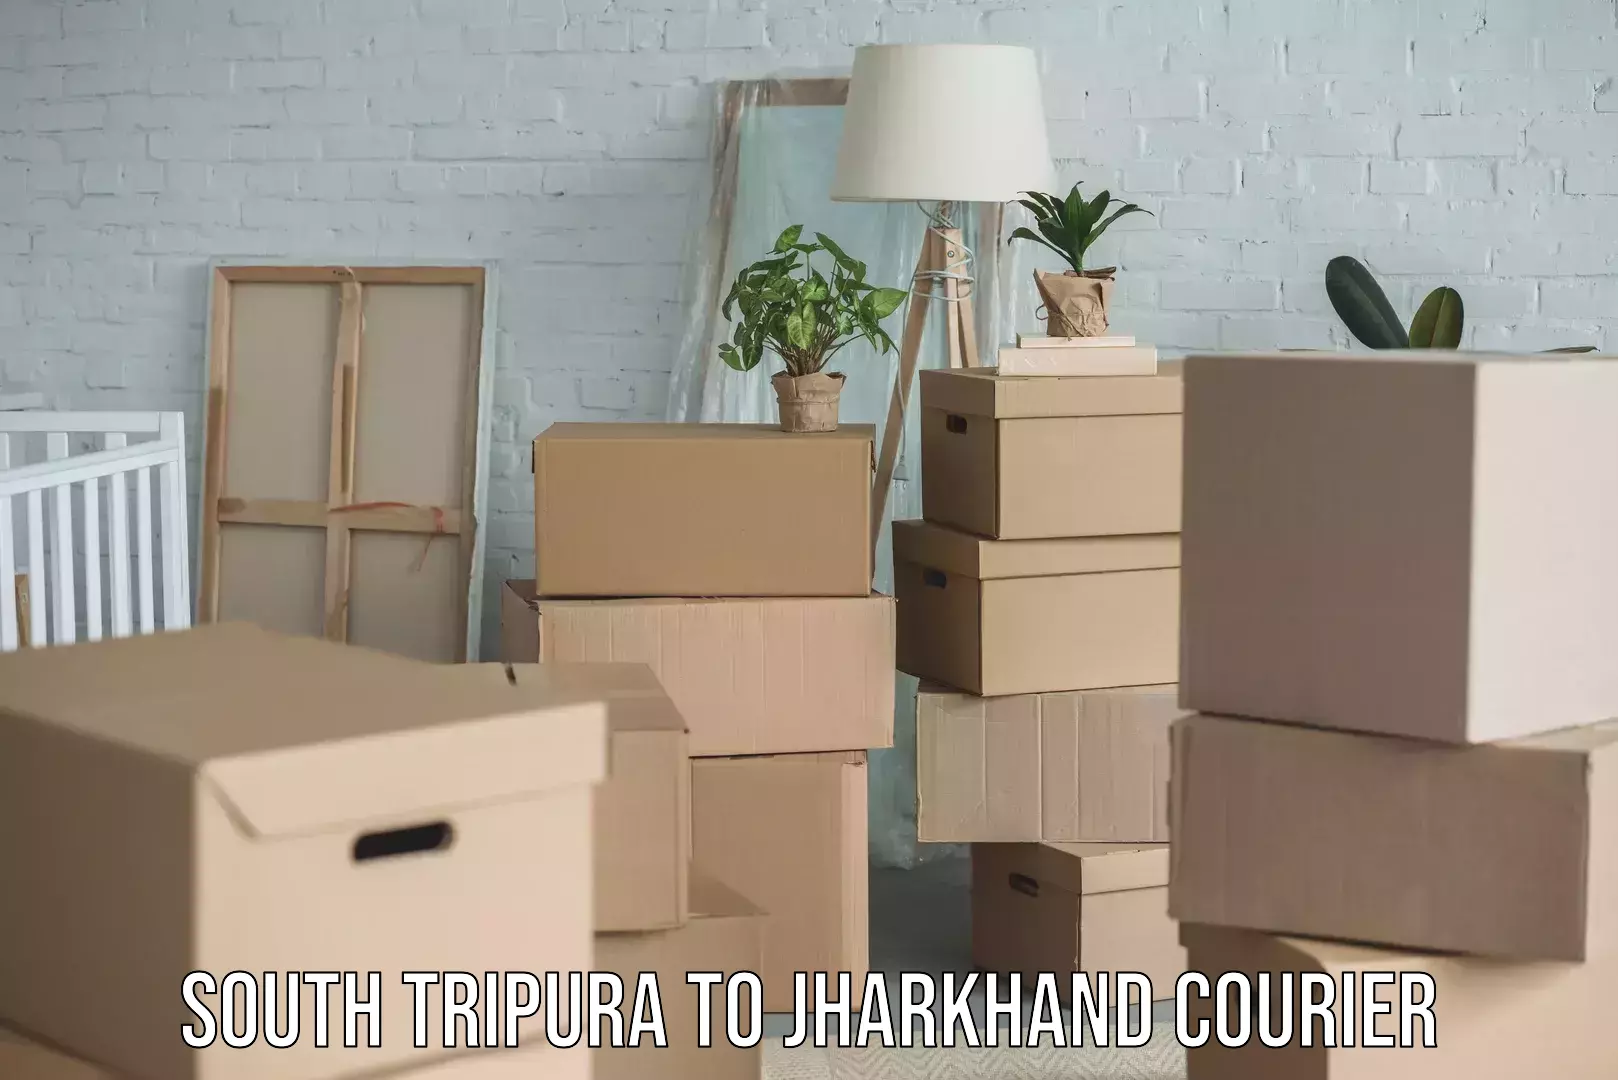 Subscription-based courier South Tripura to Jharkhand